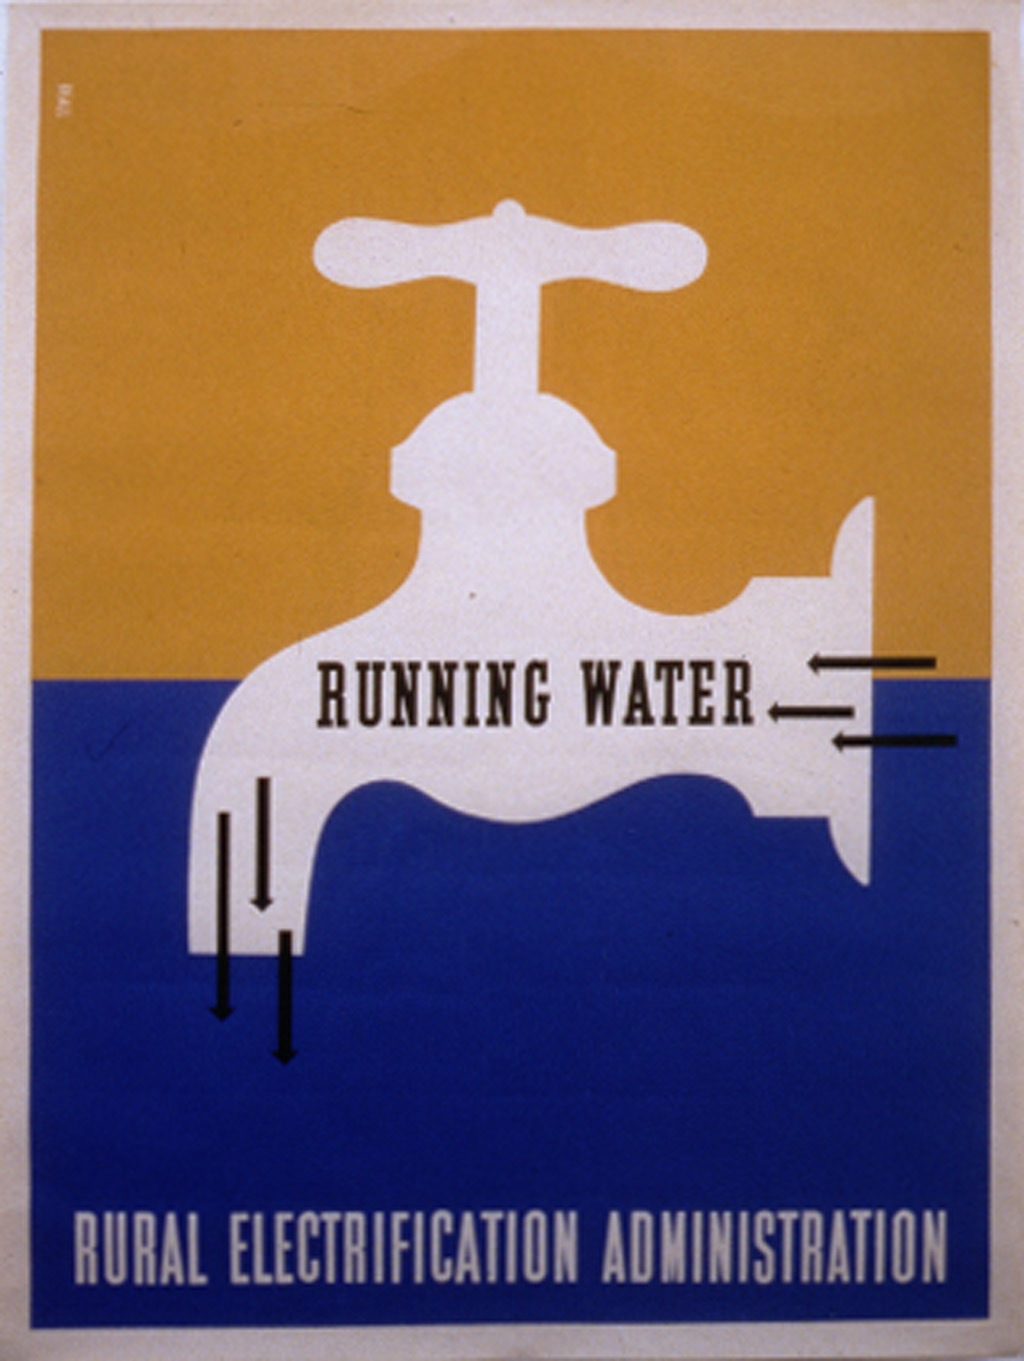 Running water : Rural Electrification Administration